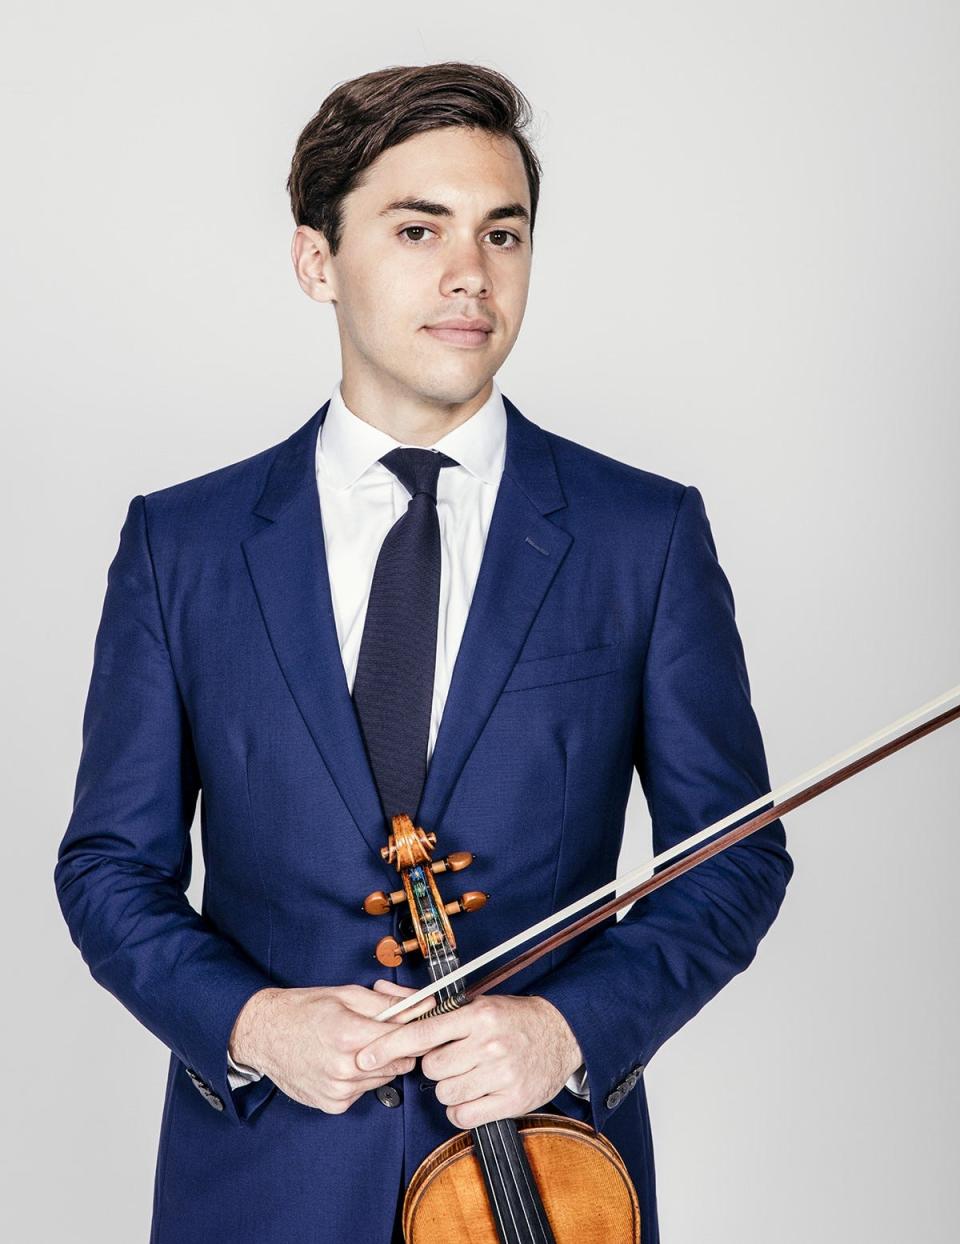 Violinist Benjamin Beilman returns to Sarasota for an Artist Series Concerts program featuring Curtis on Tour with alumni and current students of the Curtis of Music.